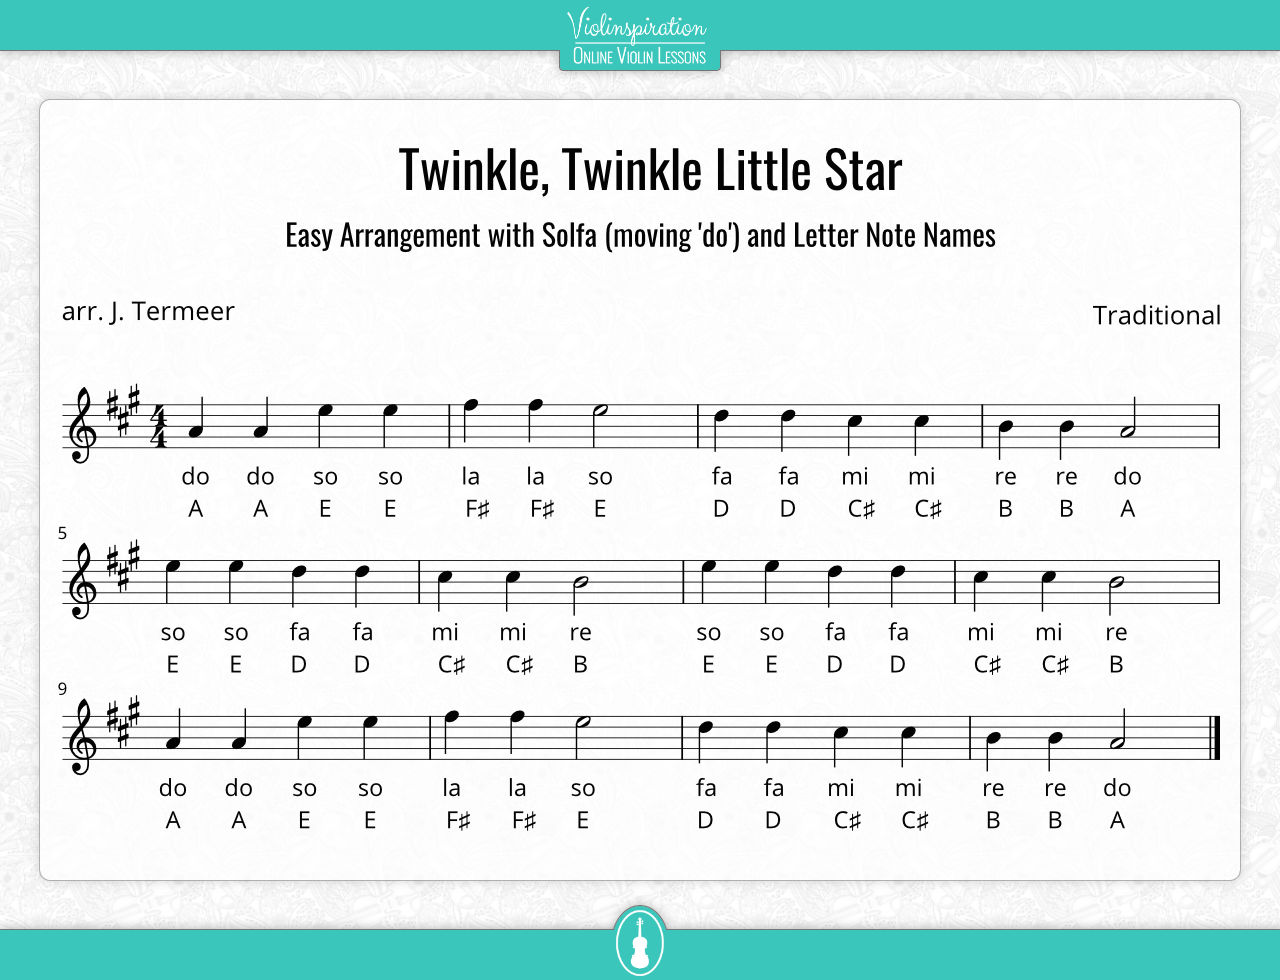 Twinkle Twinkle Little Star - Solfa and letter note names